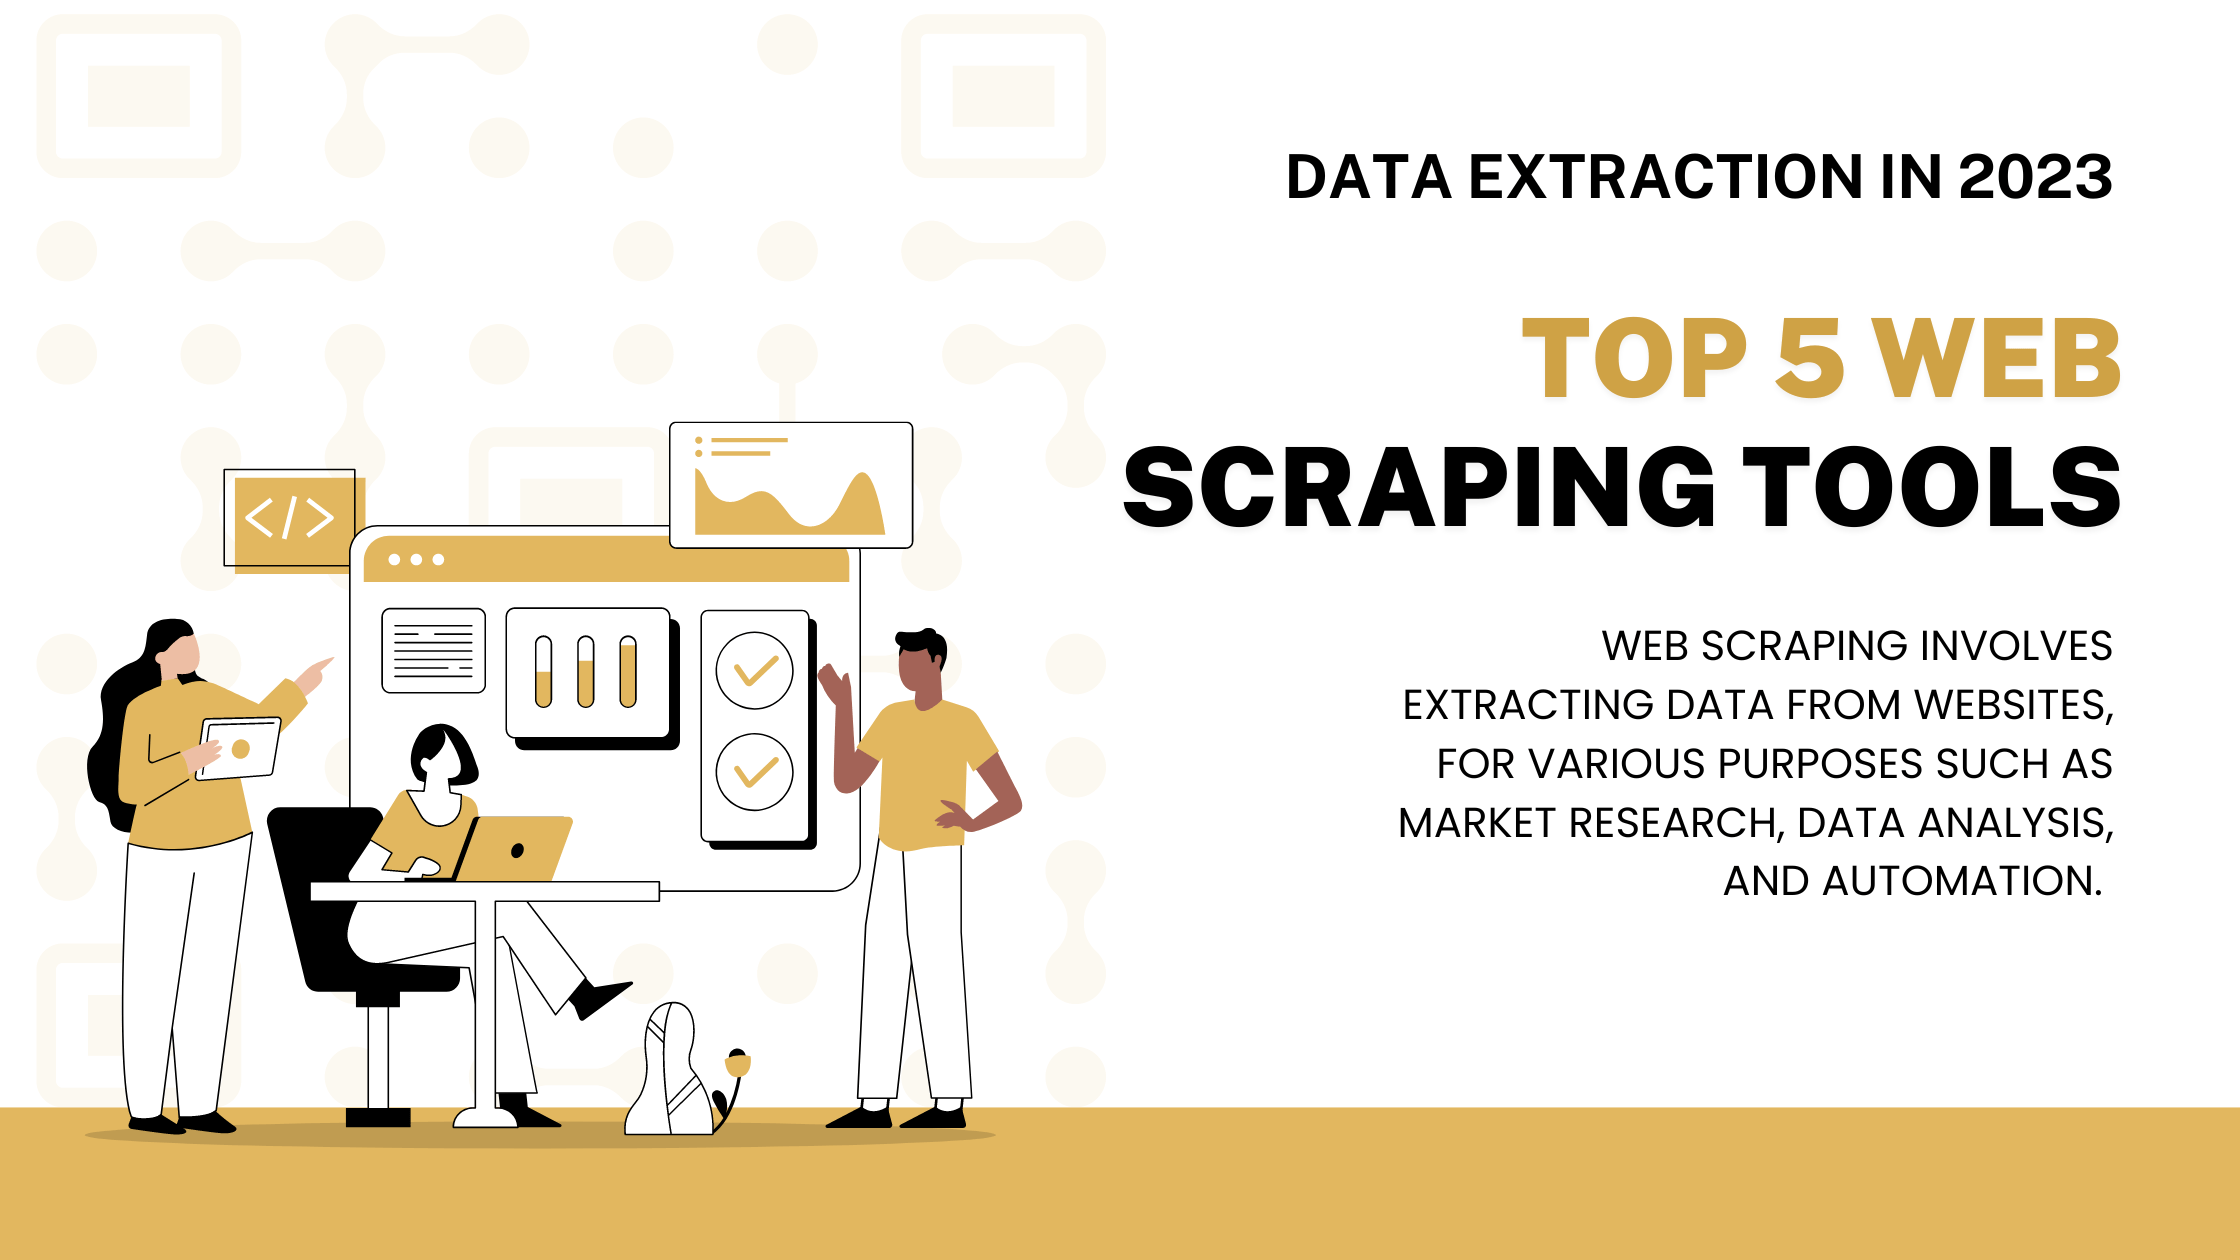 Data Extraction Made Easy: The Top 5 Web Scraping Tools Every NodeJS Developer Must Know in 2023